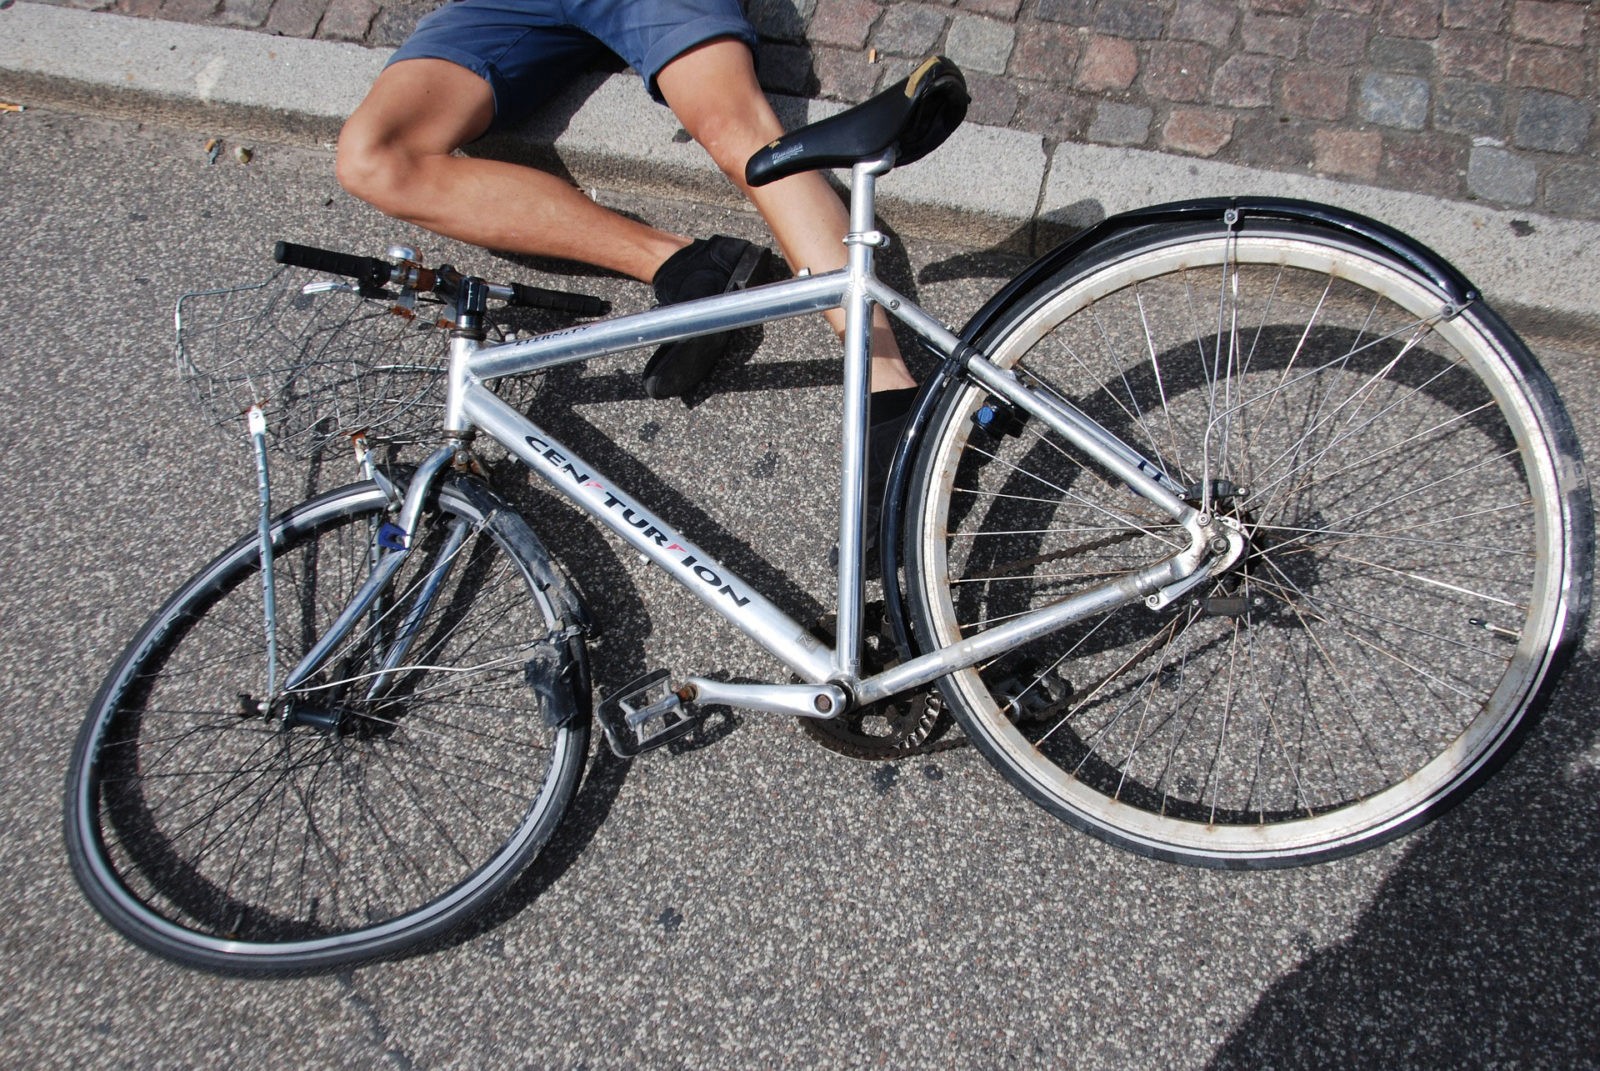 Man in bicycle accident